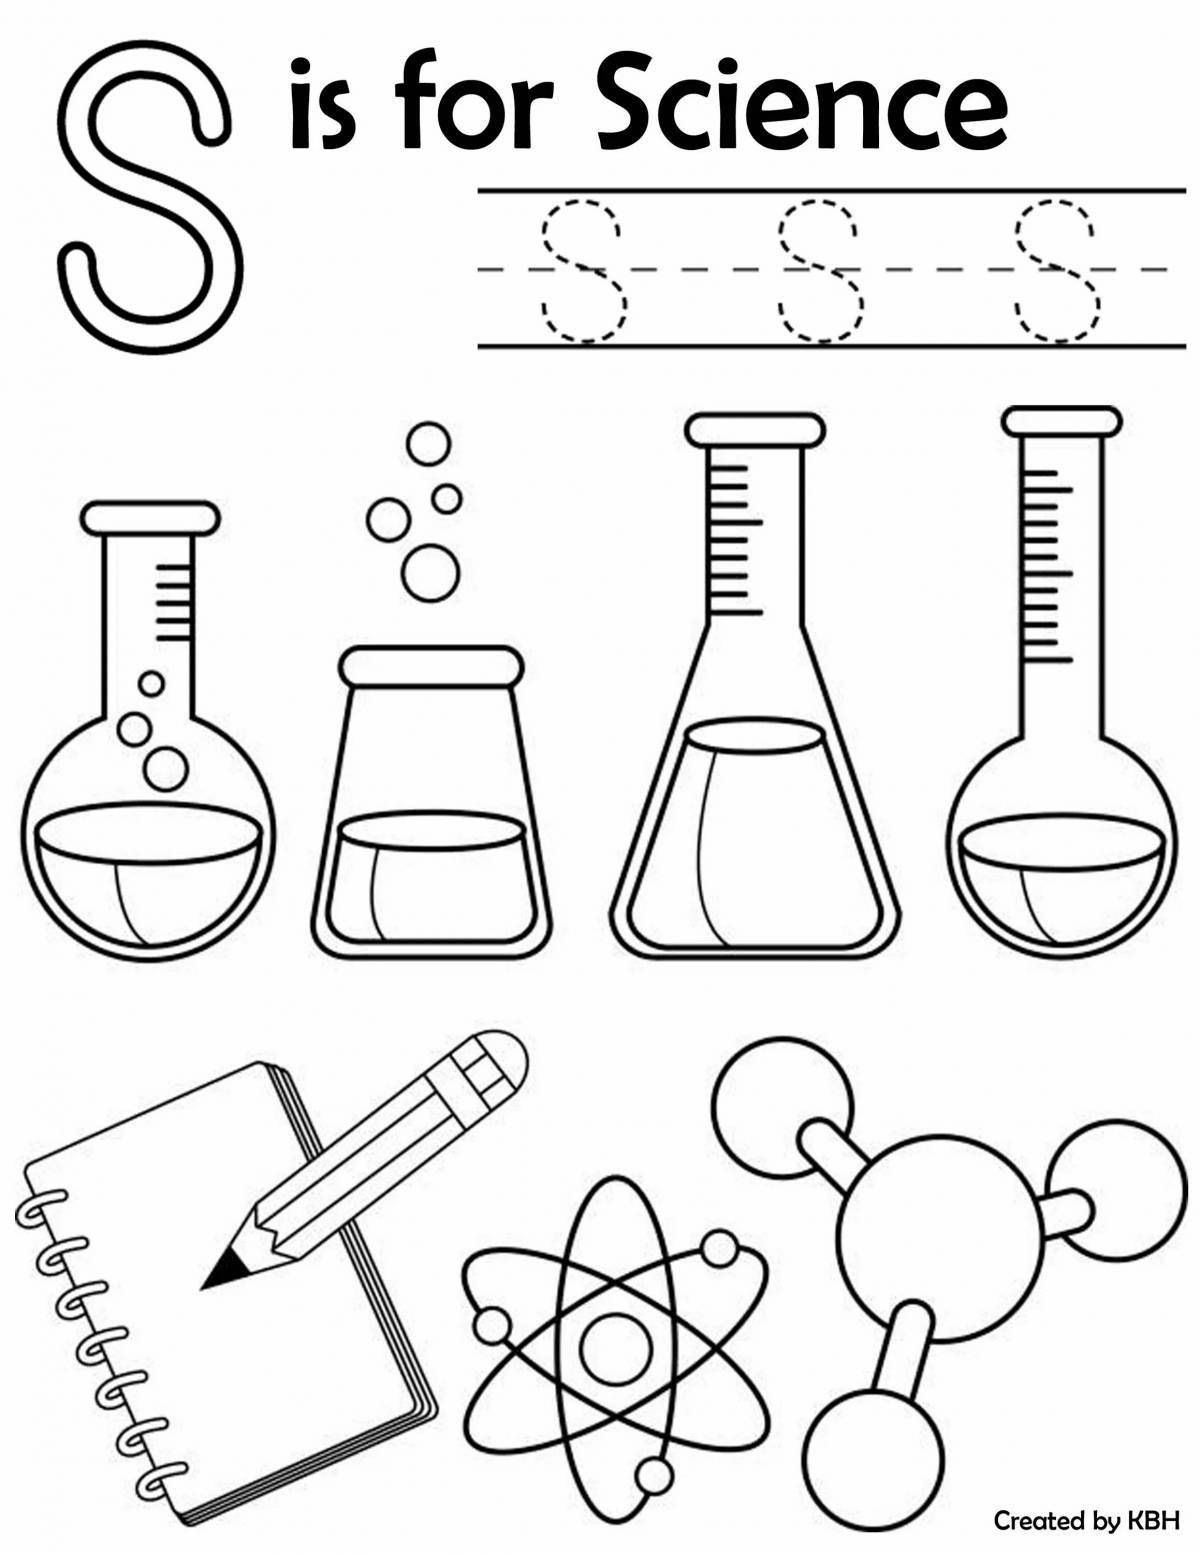 Entertaining chemistry coloring book for young children